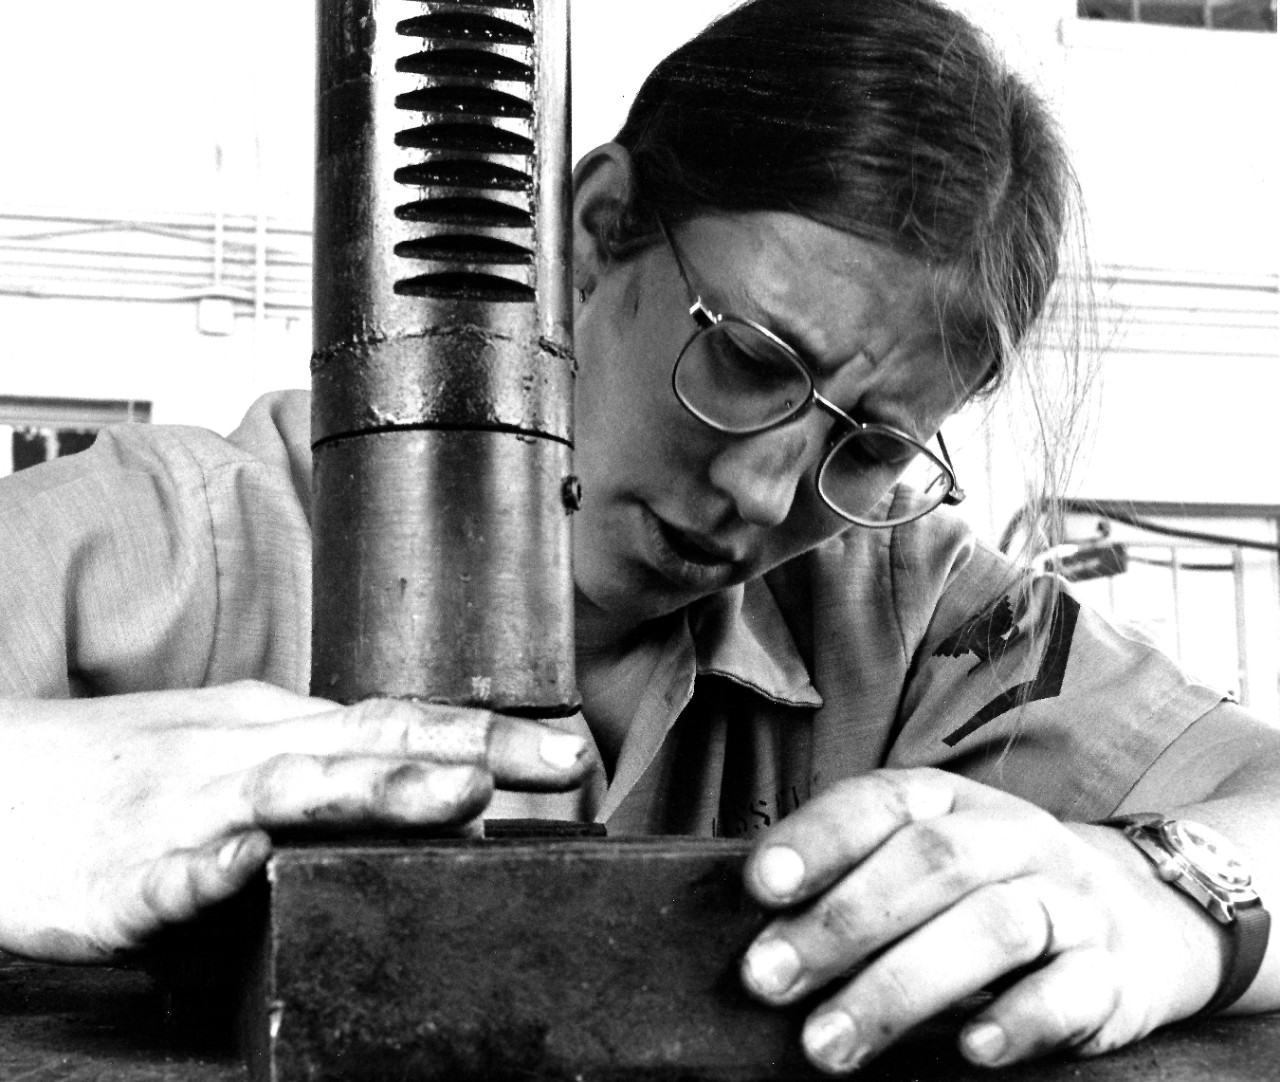 USN 1165723:   Engineman Third Class Cathy Russell, June 1975.   Russell concentrates on the task at hand as she works to repair equipment at the boat house at U.S. Naval Air Station, North Island, San Diego, California.   Photographed by PHAN Jo Cooper.   Official U.S. Navy photograph, now in the collections of the National Archives.  